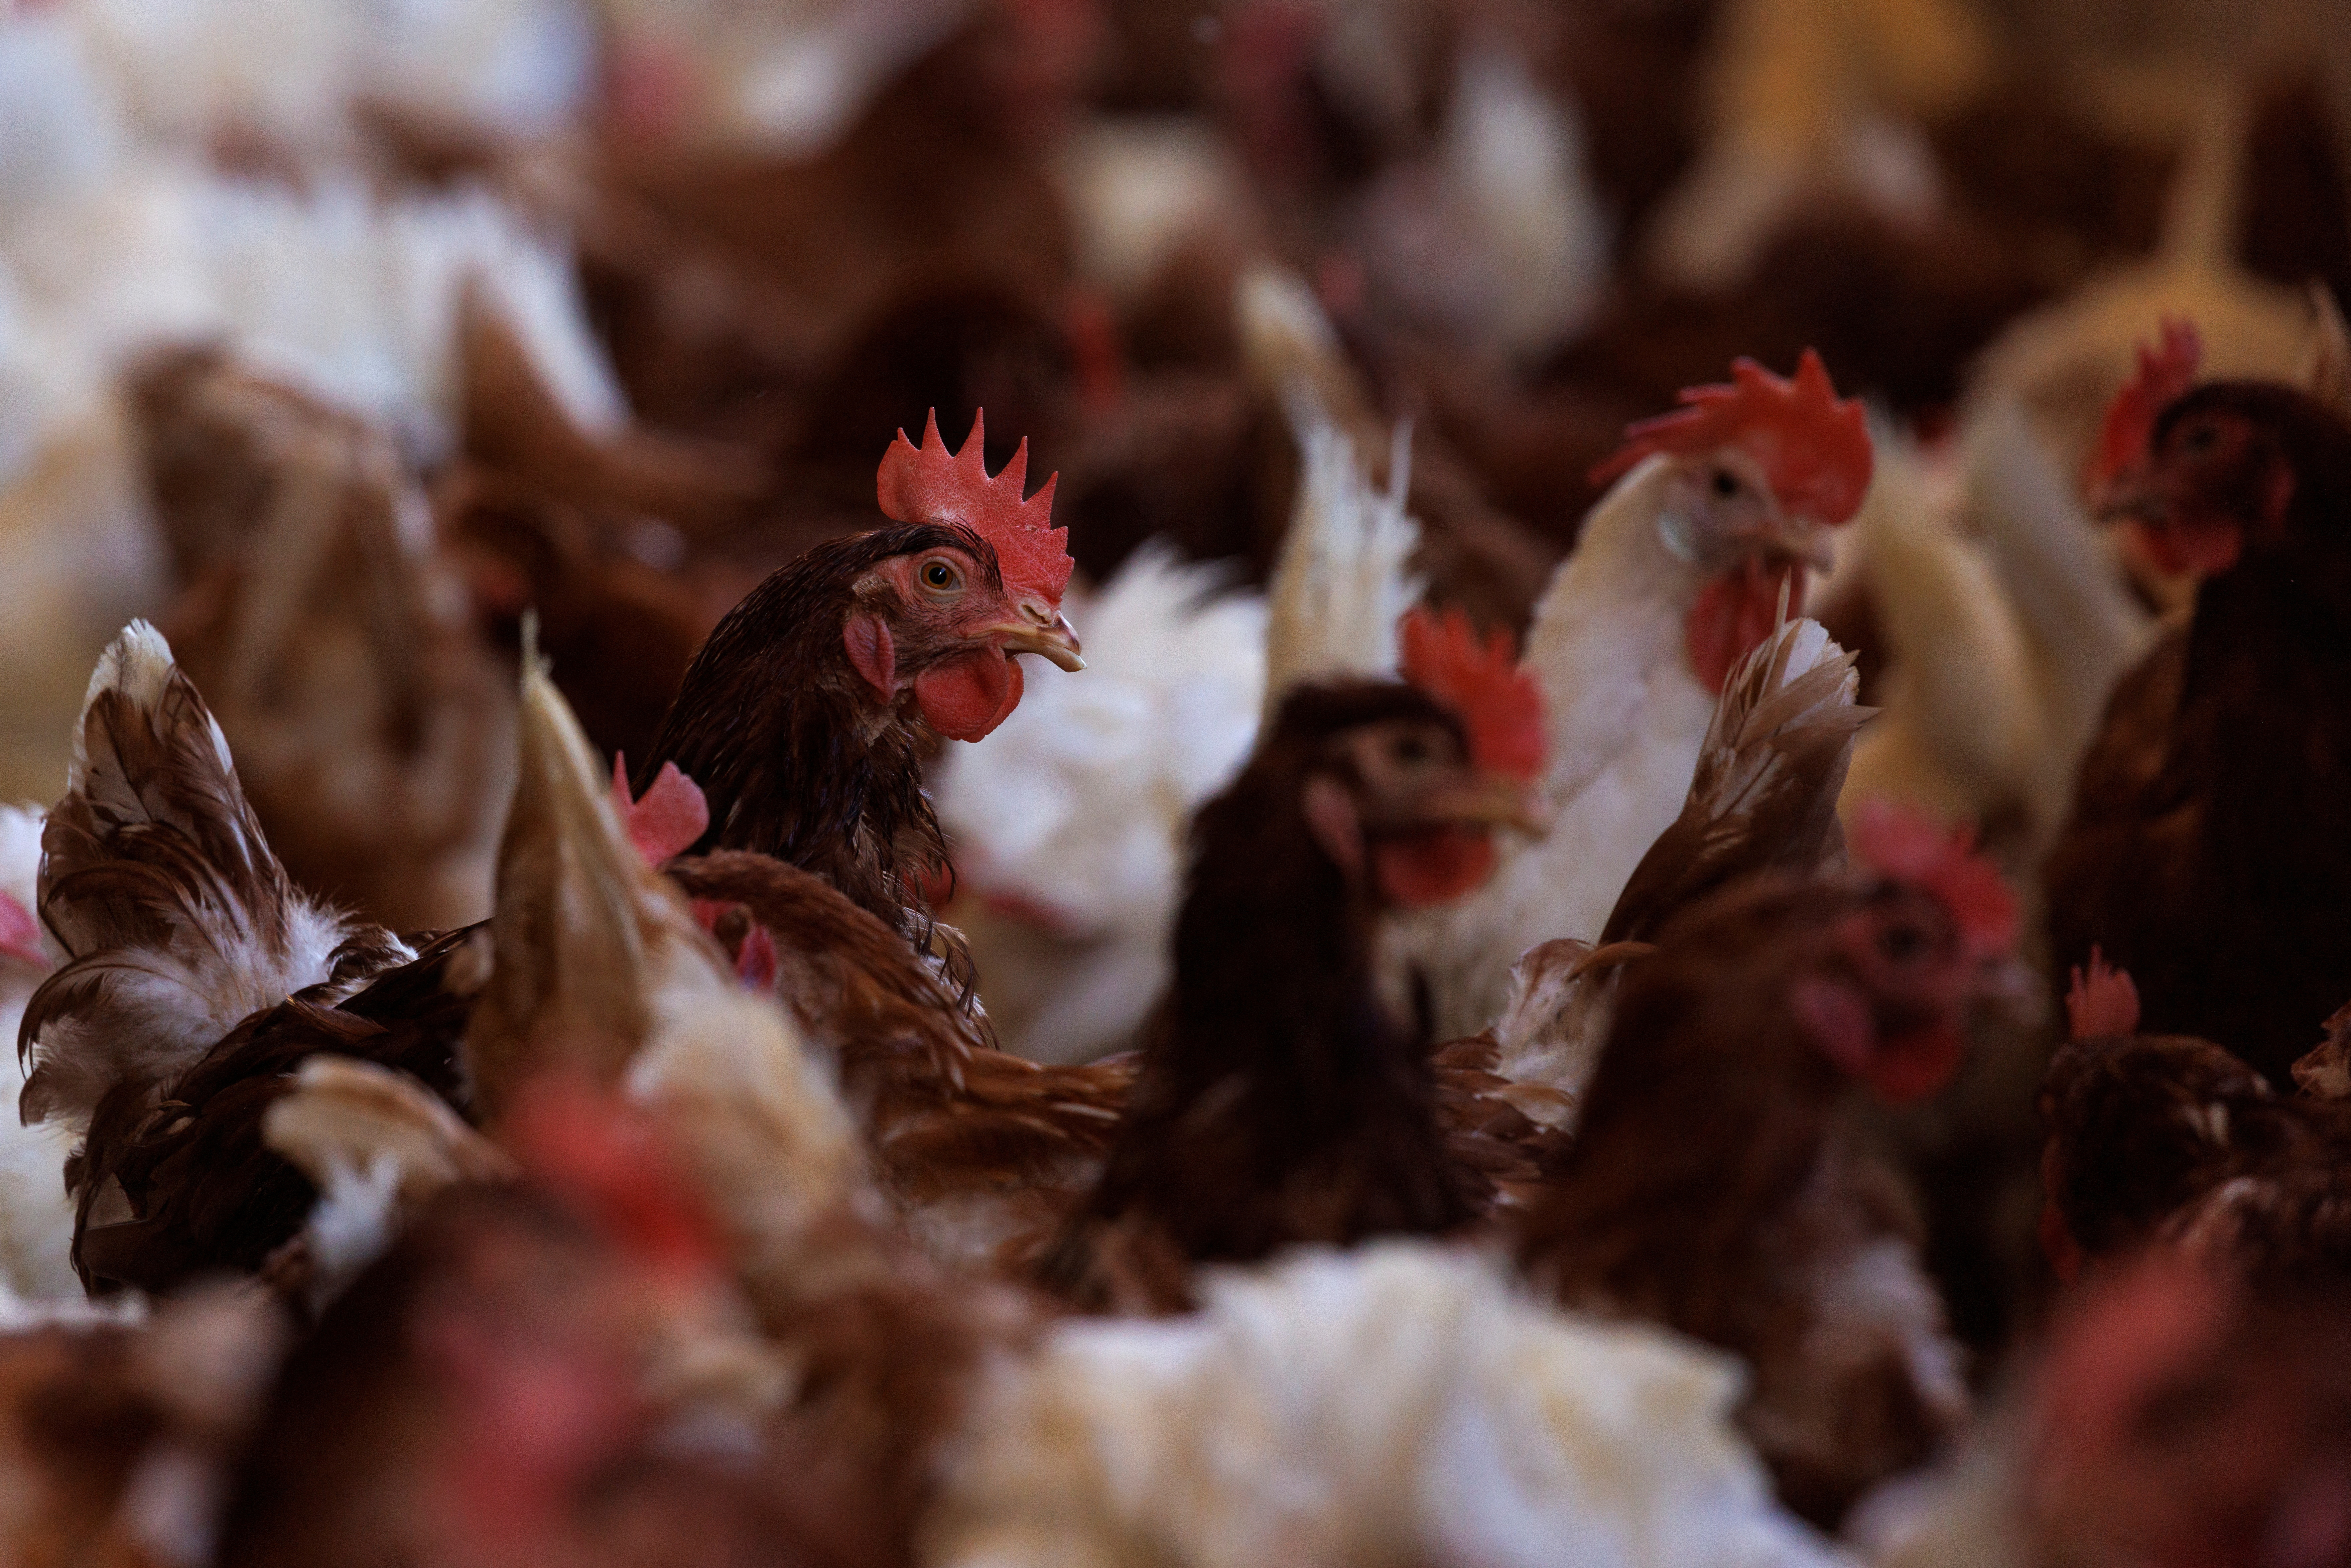 Cage-free chickens are shown inside a facility at Hilliker's Ranch Fresh Eggs in Lakeside